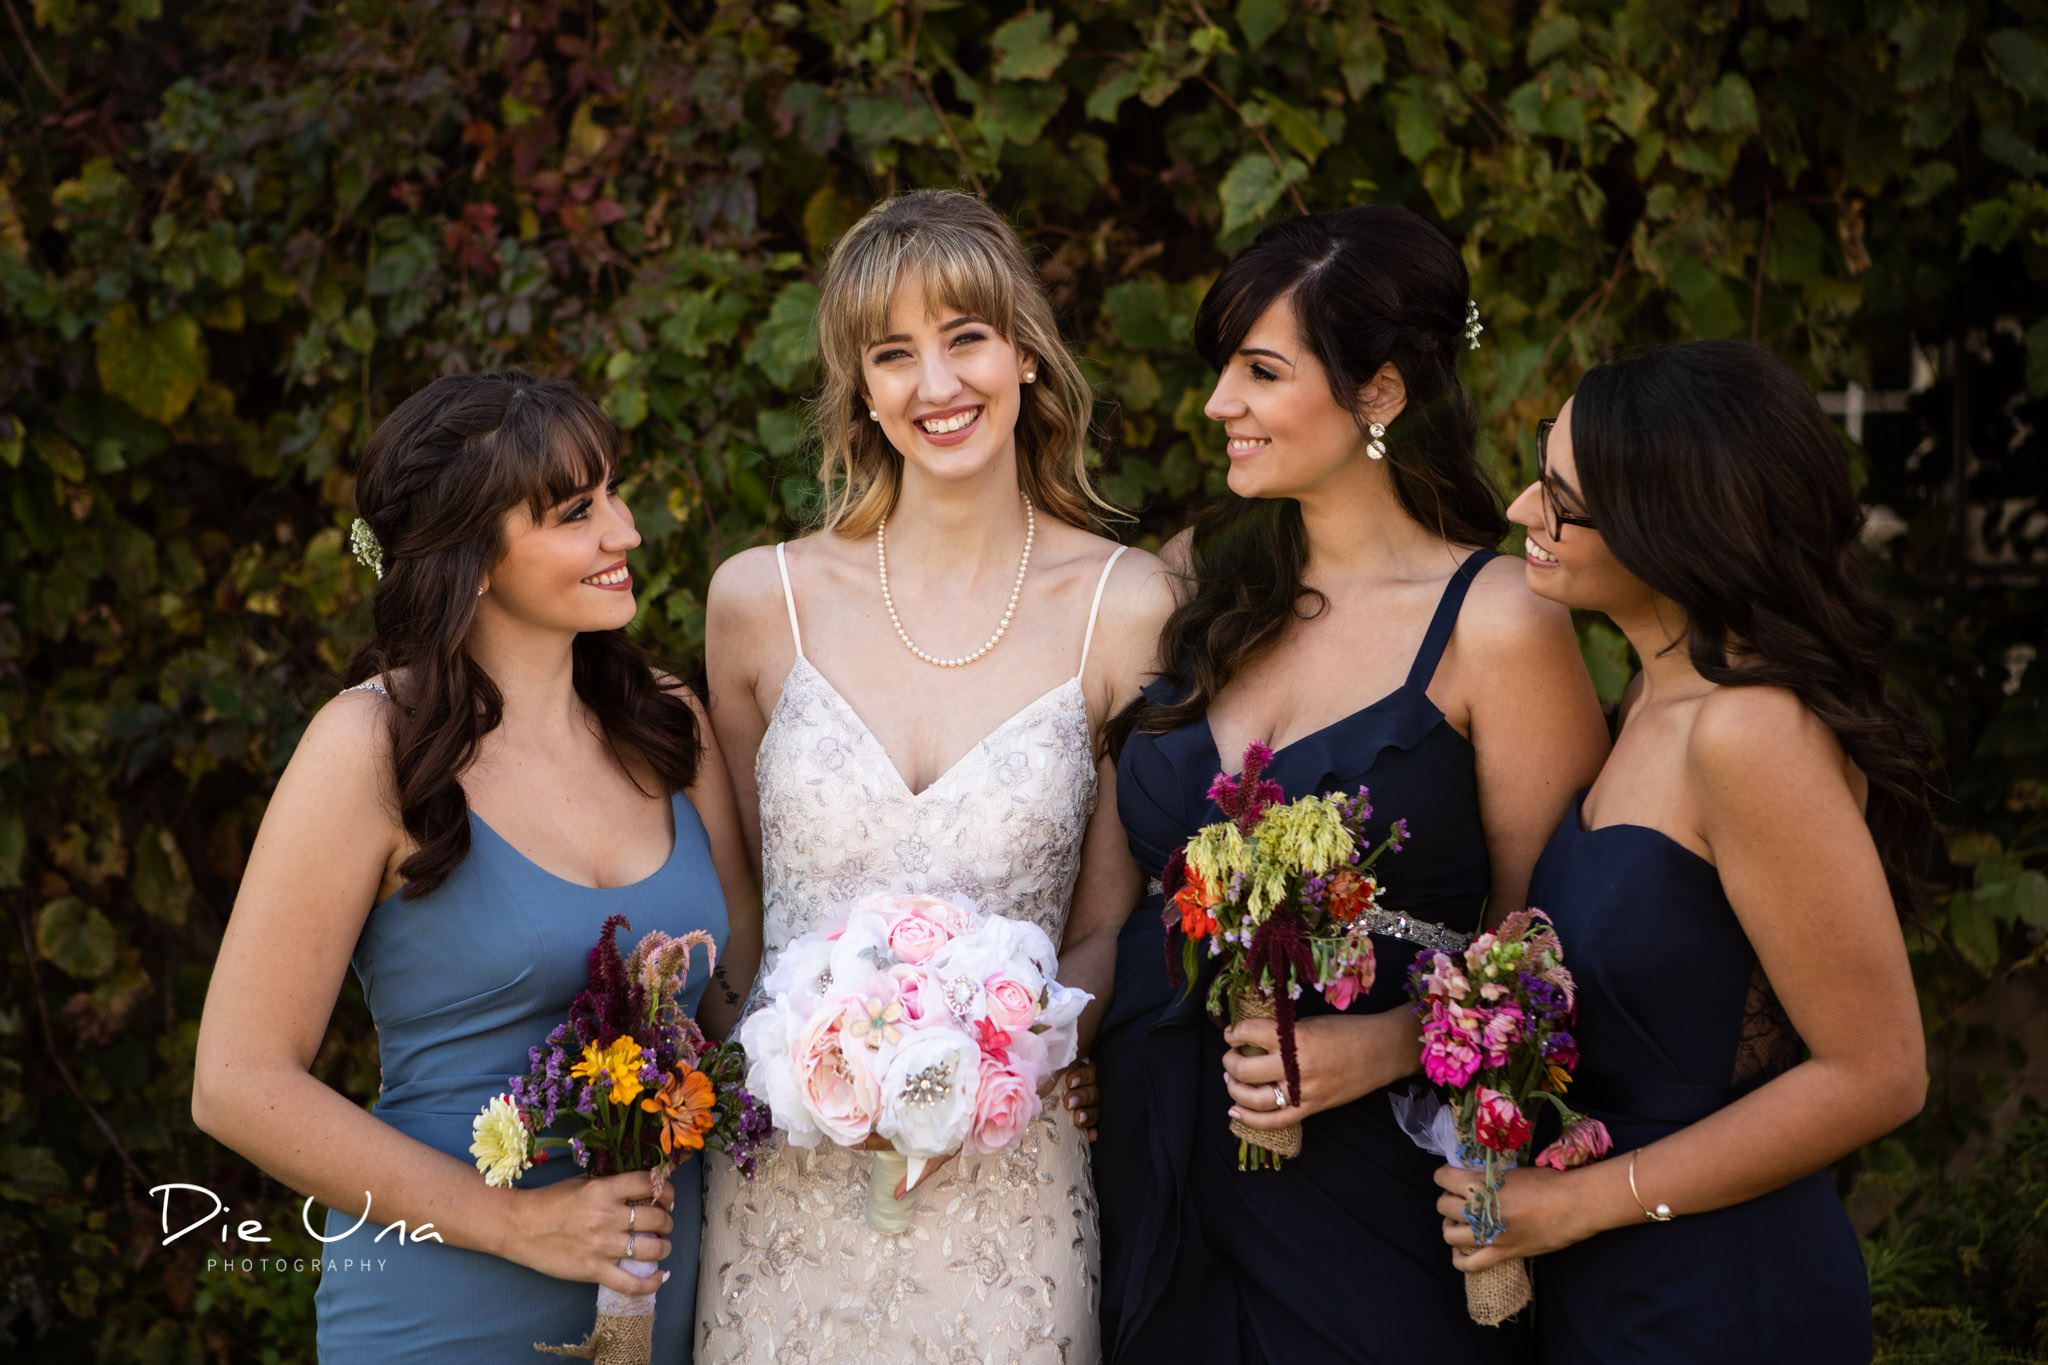 beautiful bride and her sisters wedding photography.jpg